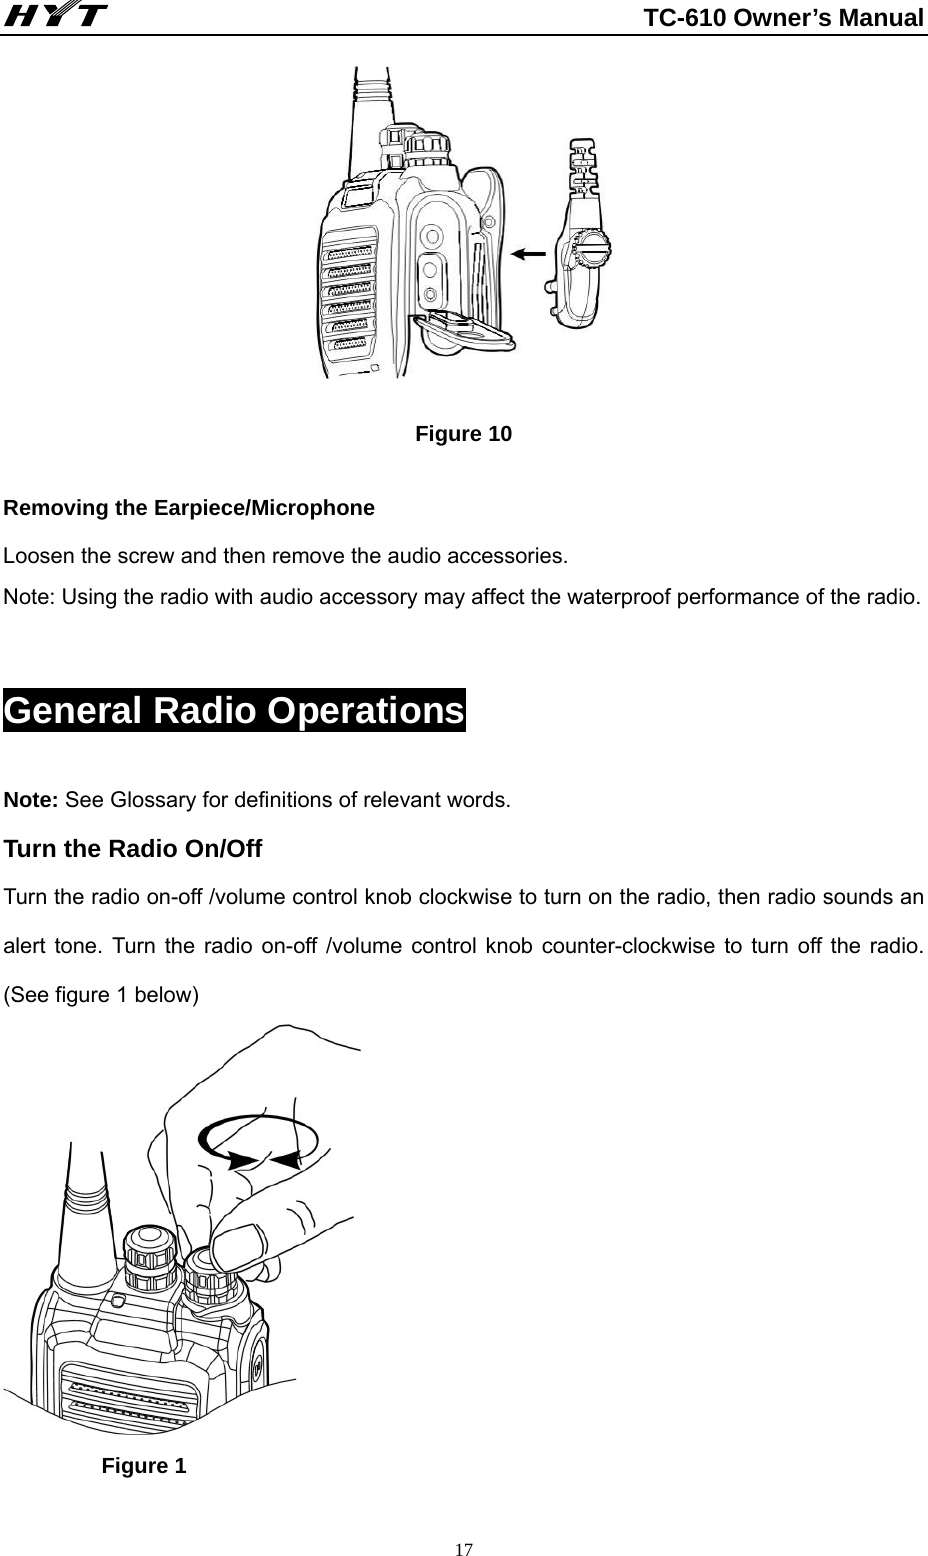                                                          TC-610 Owner’s Manual  17  Figure 10  Removing the Earpiece/Microphone Loosen the screw and then remove the audio accessories.     Note: Using the radio with audio accessory may affect the waterproof performance of the radio.  General Radio Operations Note: See Glossary for definitions of relevant words.         Turn the Radio On/Off Turn the radio on-off /volume control knob clockwise to turn on the radio, then radio sounds an alert tone. Turn the radio on-off /volume control knob counter-clockwise to turn off the radio. (See figure 1 below)    Figure 1 